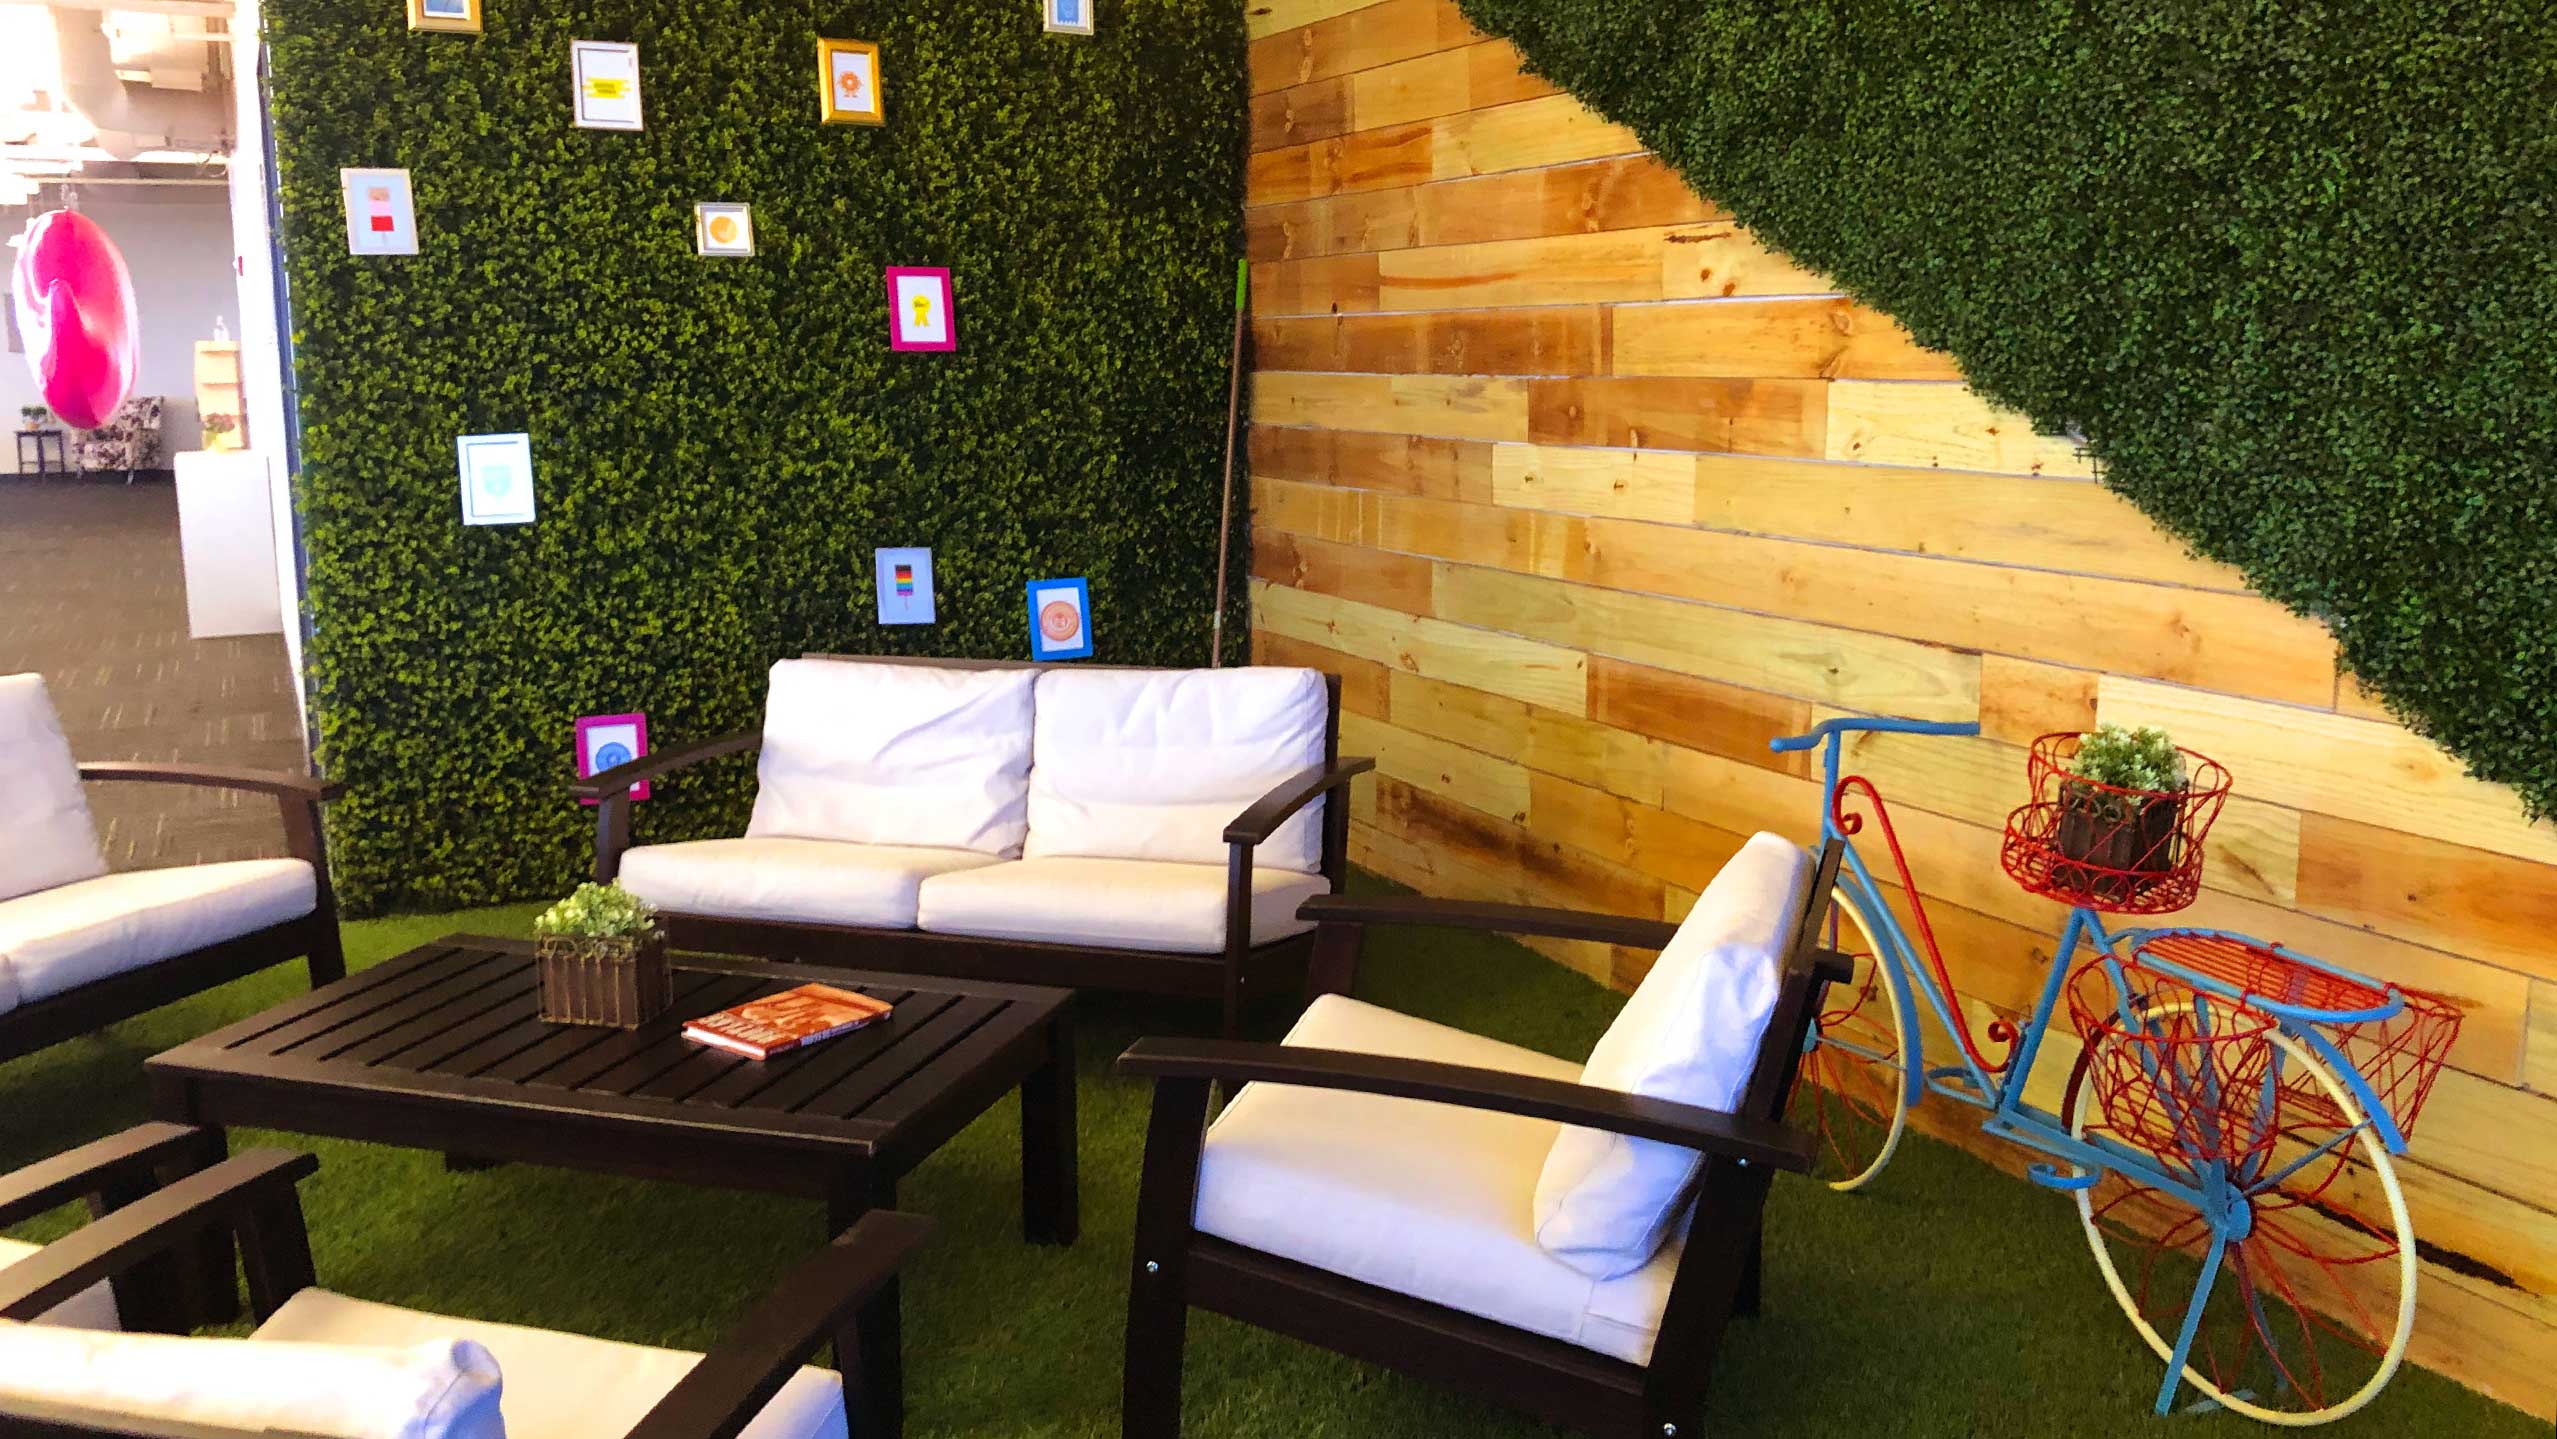 Photo of the waiting area at the IntouchCX campus in Orlando